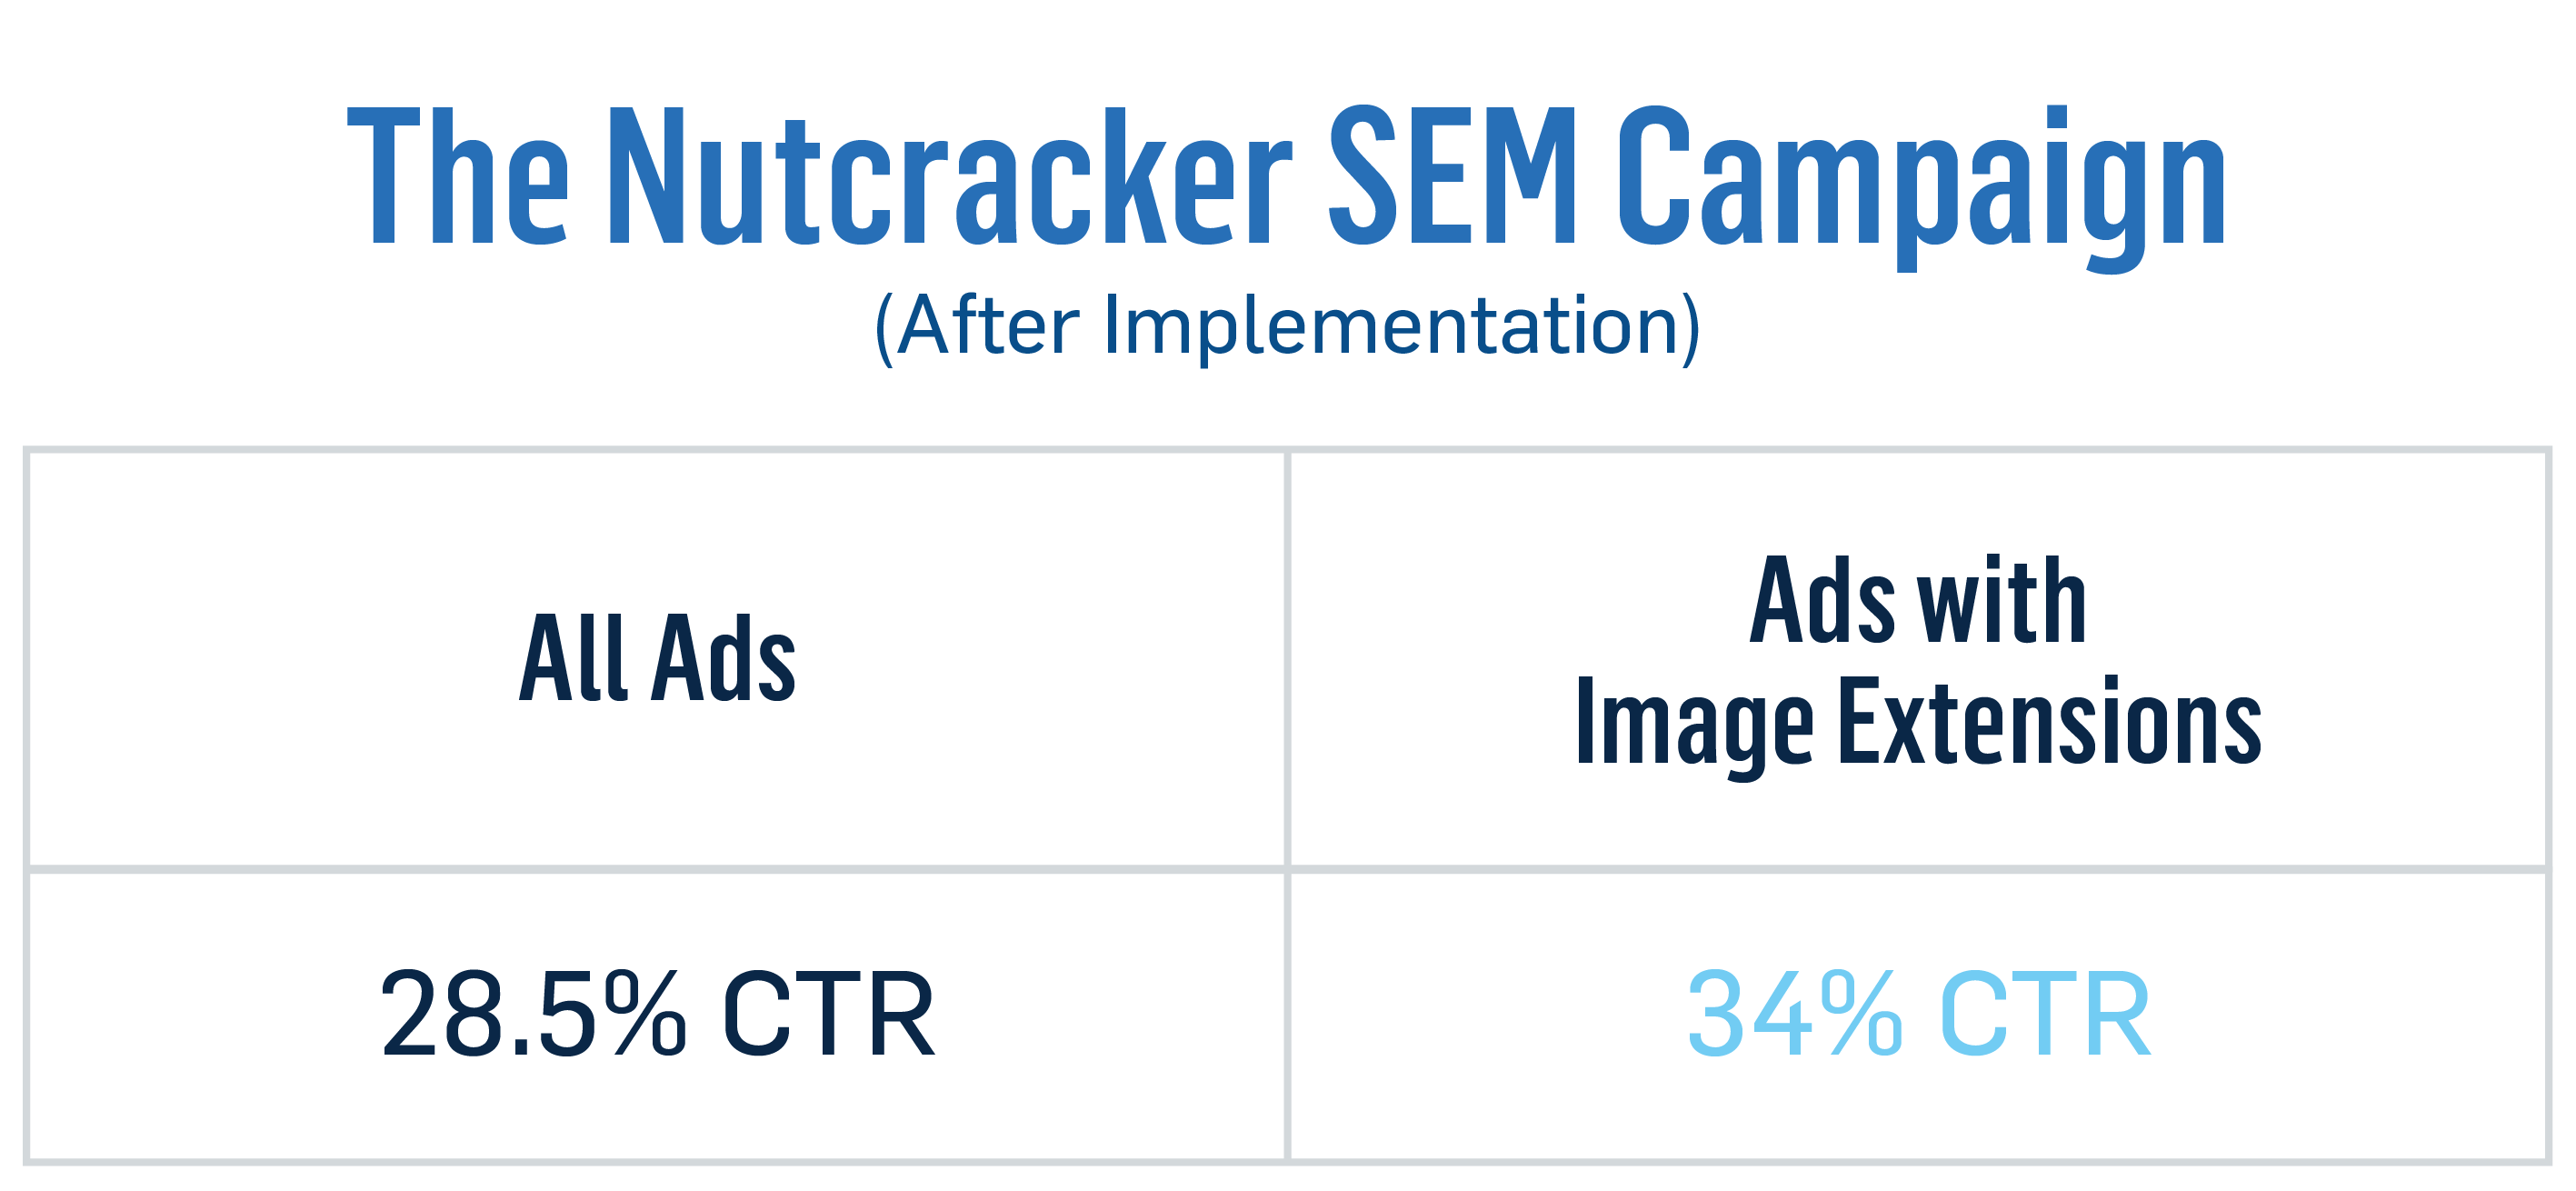 The Nutcracker Campaign - After Implementation with a 28.5% CTR for all ads and a 34% CTR for ads with image extensions.